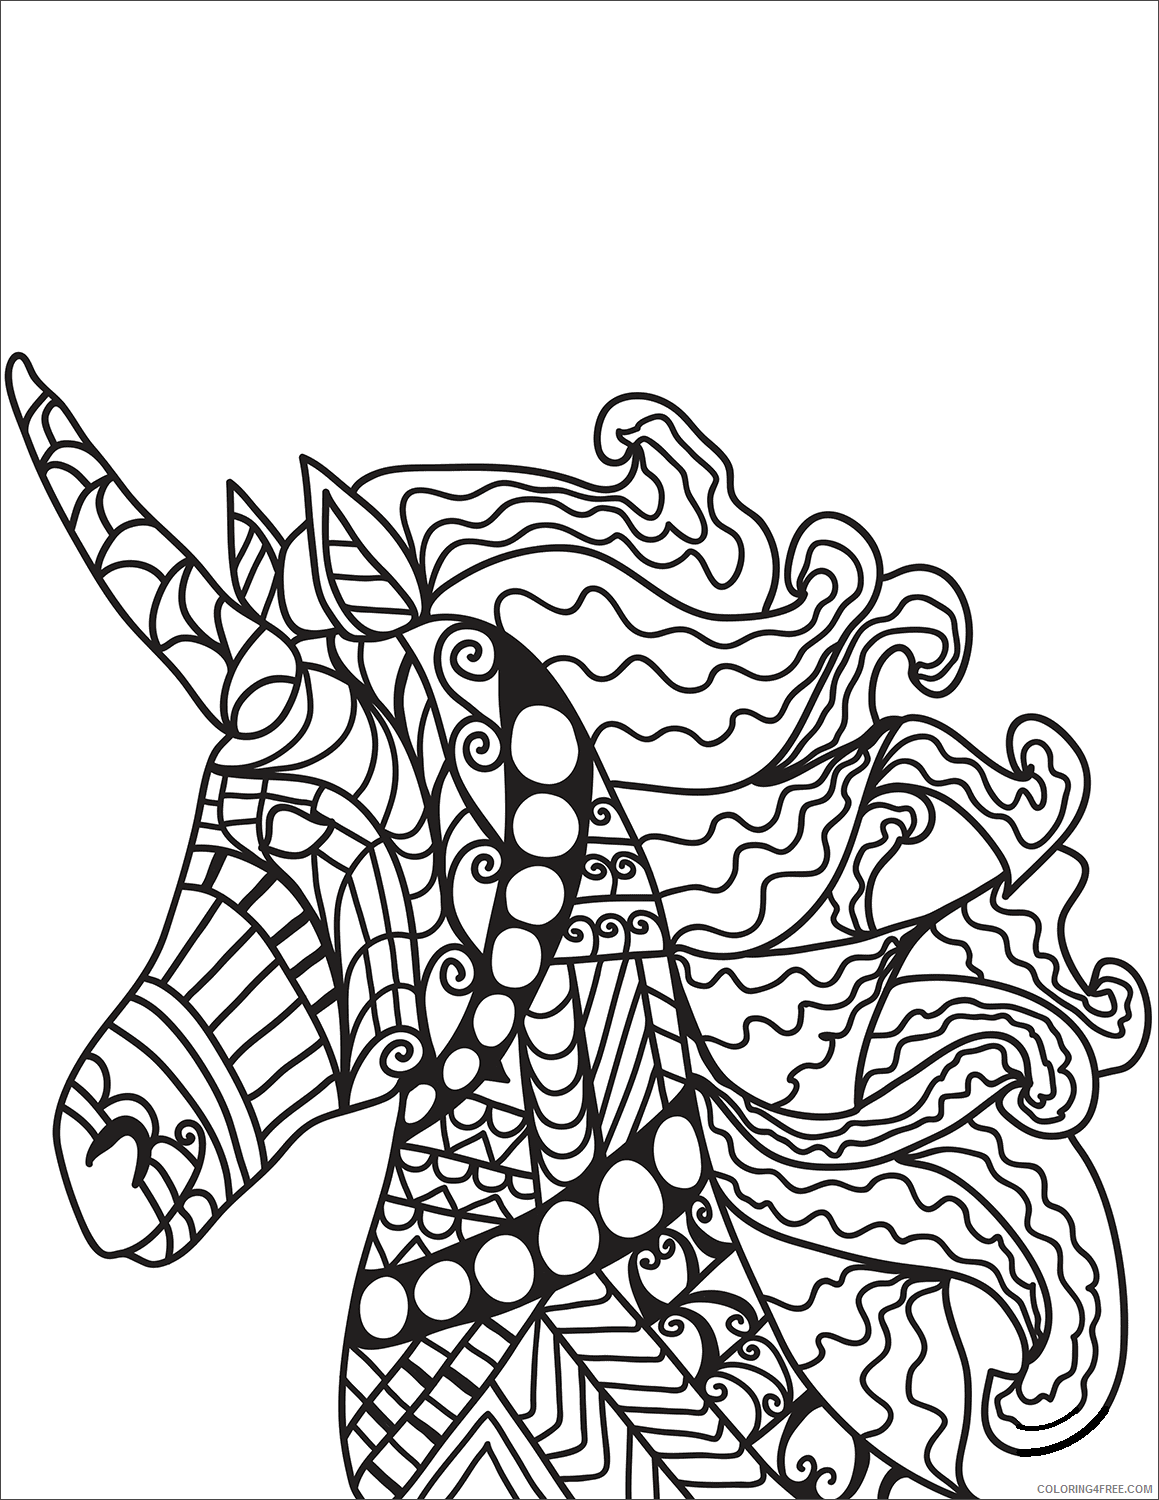 Animal Zentangle Coloring Pages unicorn zentangle 27 Printable 2020 179 Coloring4free